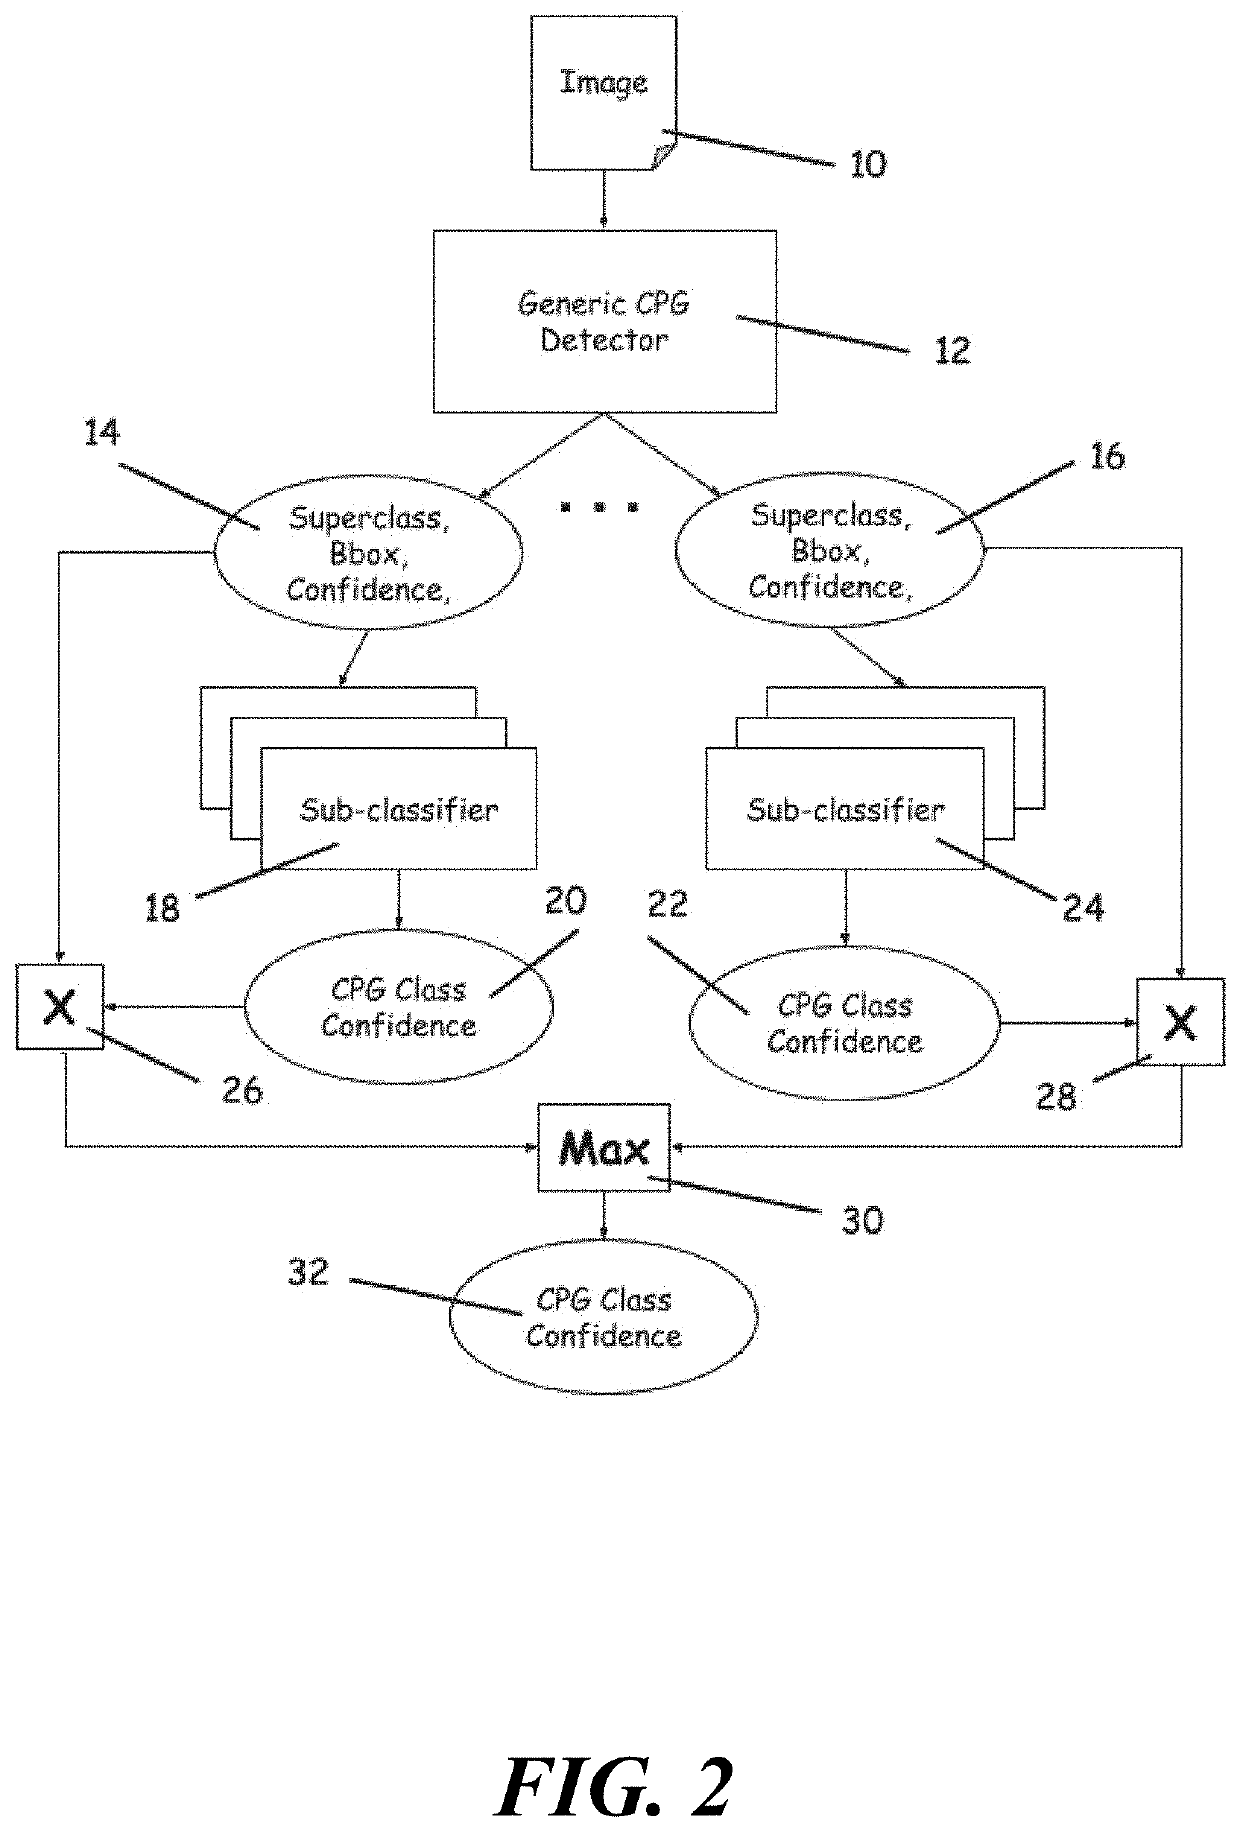 Method for scaling fine-grained object recognition of consumer packaged goods